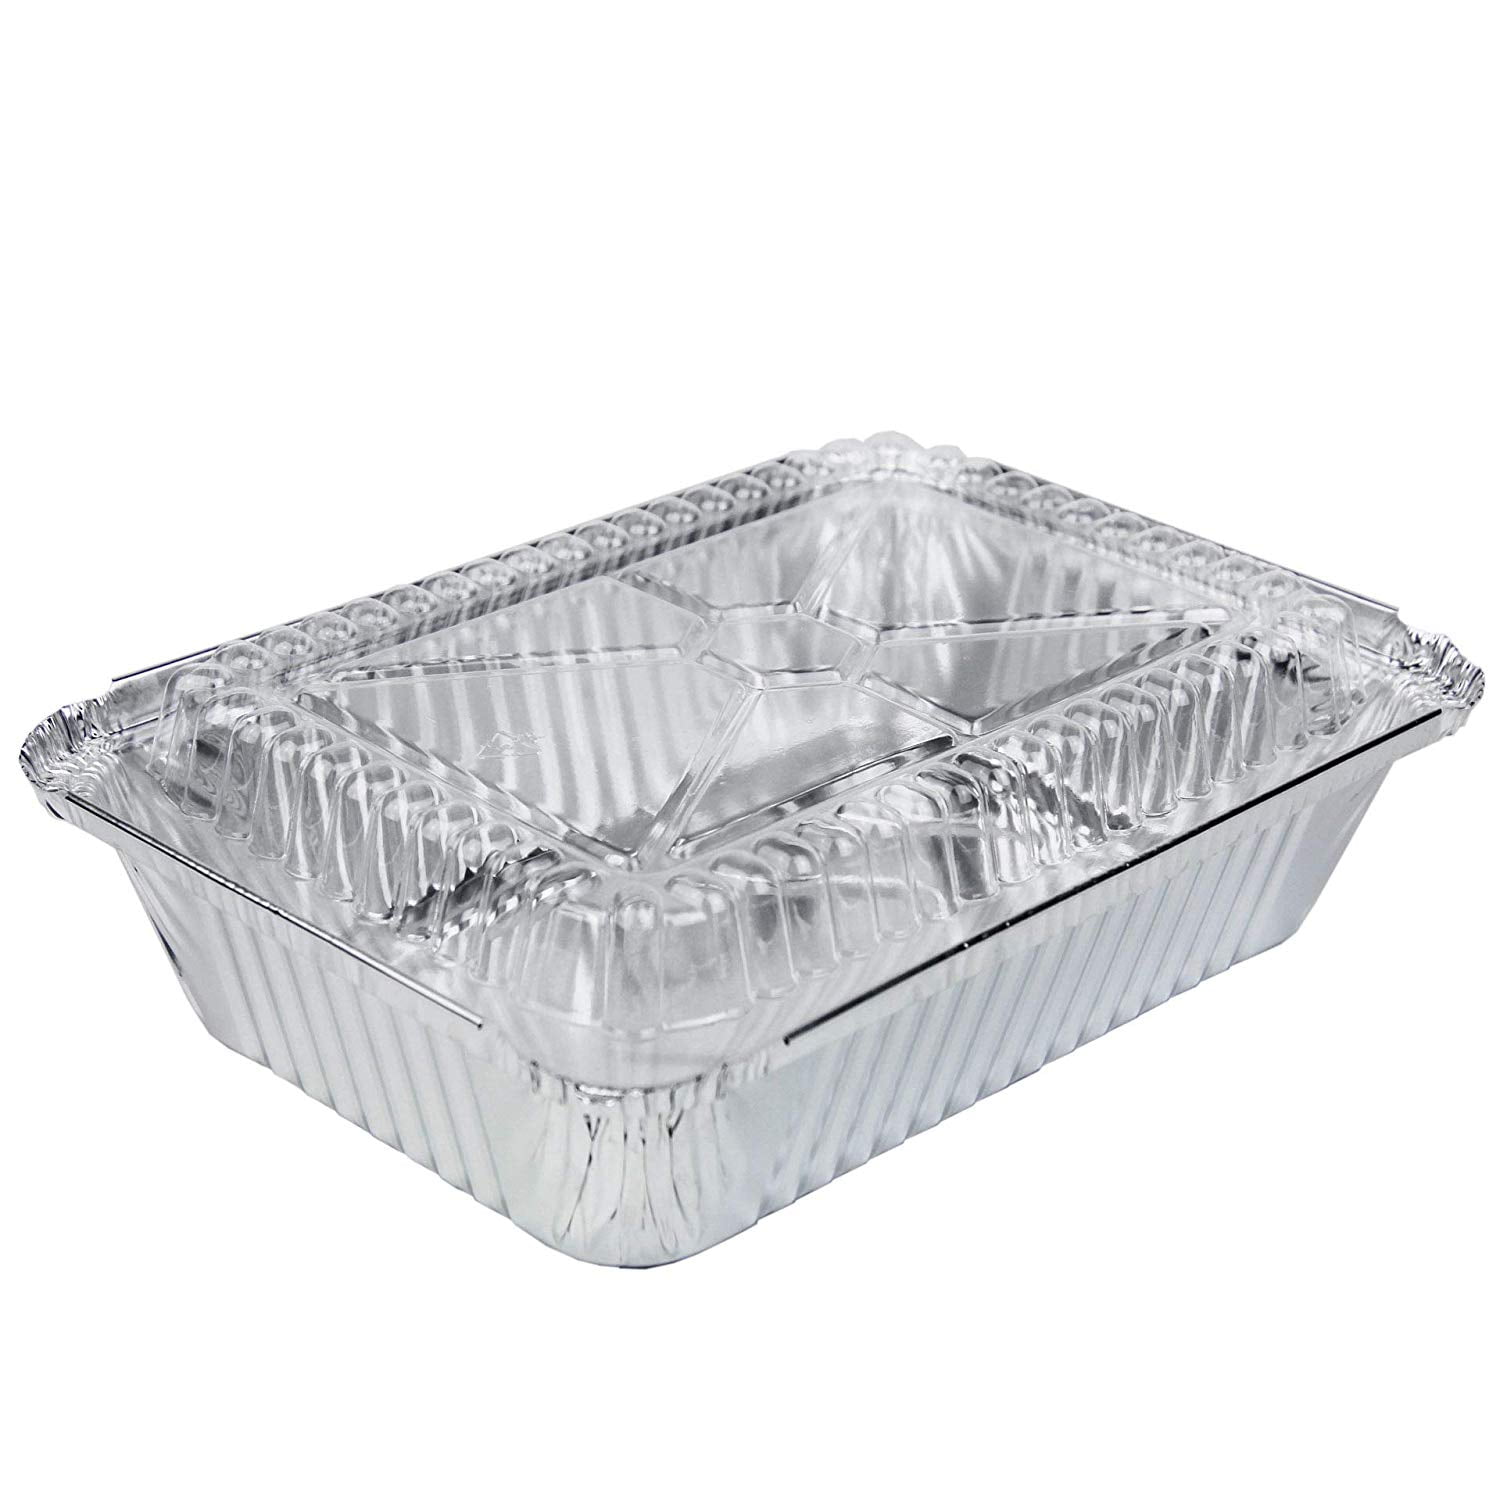 Aluminum takeout containers